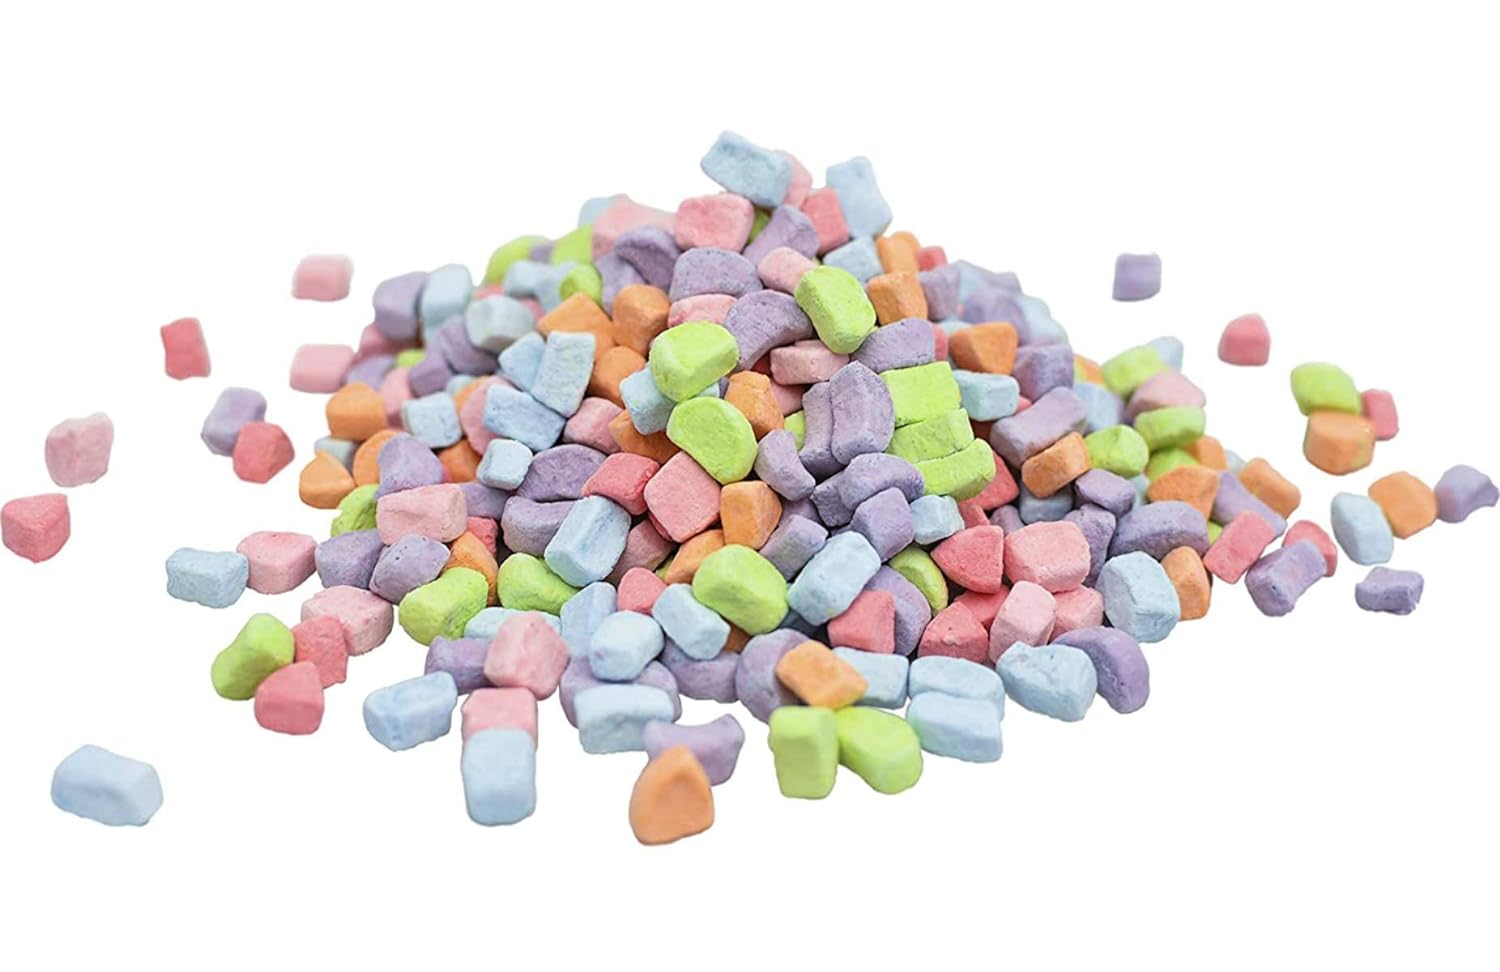 By The Cup Assorted Dehydrated Cereal Marshmallow Bits 1 Pound Bulk : Grocery & Gourmet Food